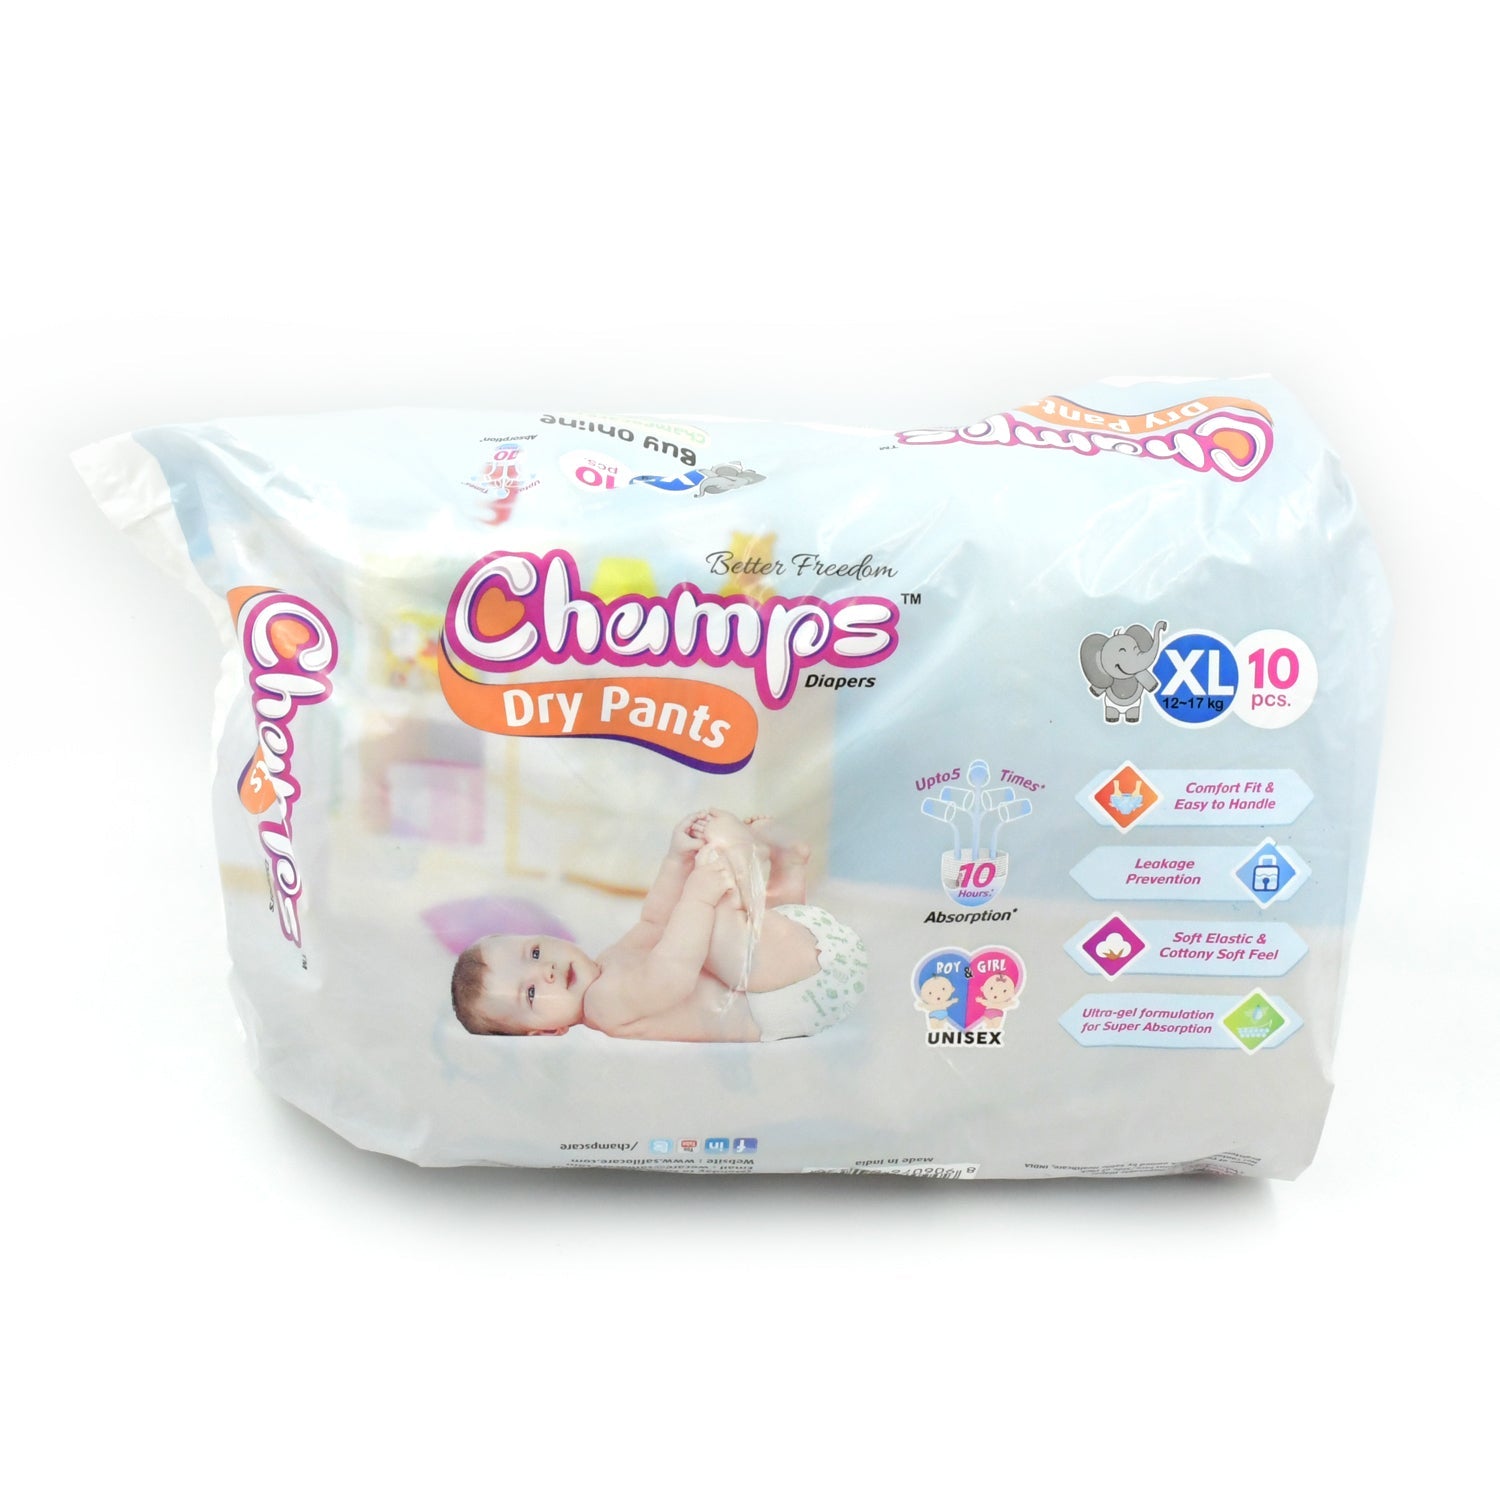 0969 Baby Diaper High Absorbent Pant Diapers,  Champs Soft and Dry Baby Diaper Pants Xl  10 Pcs (Extra Large , XL10 Pieces)